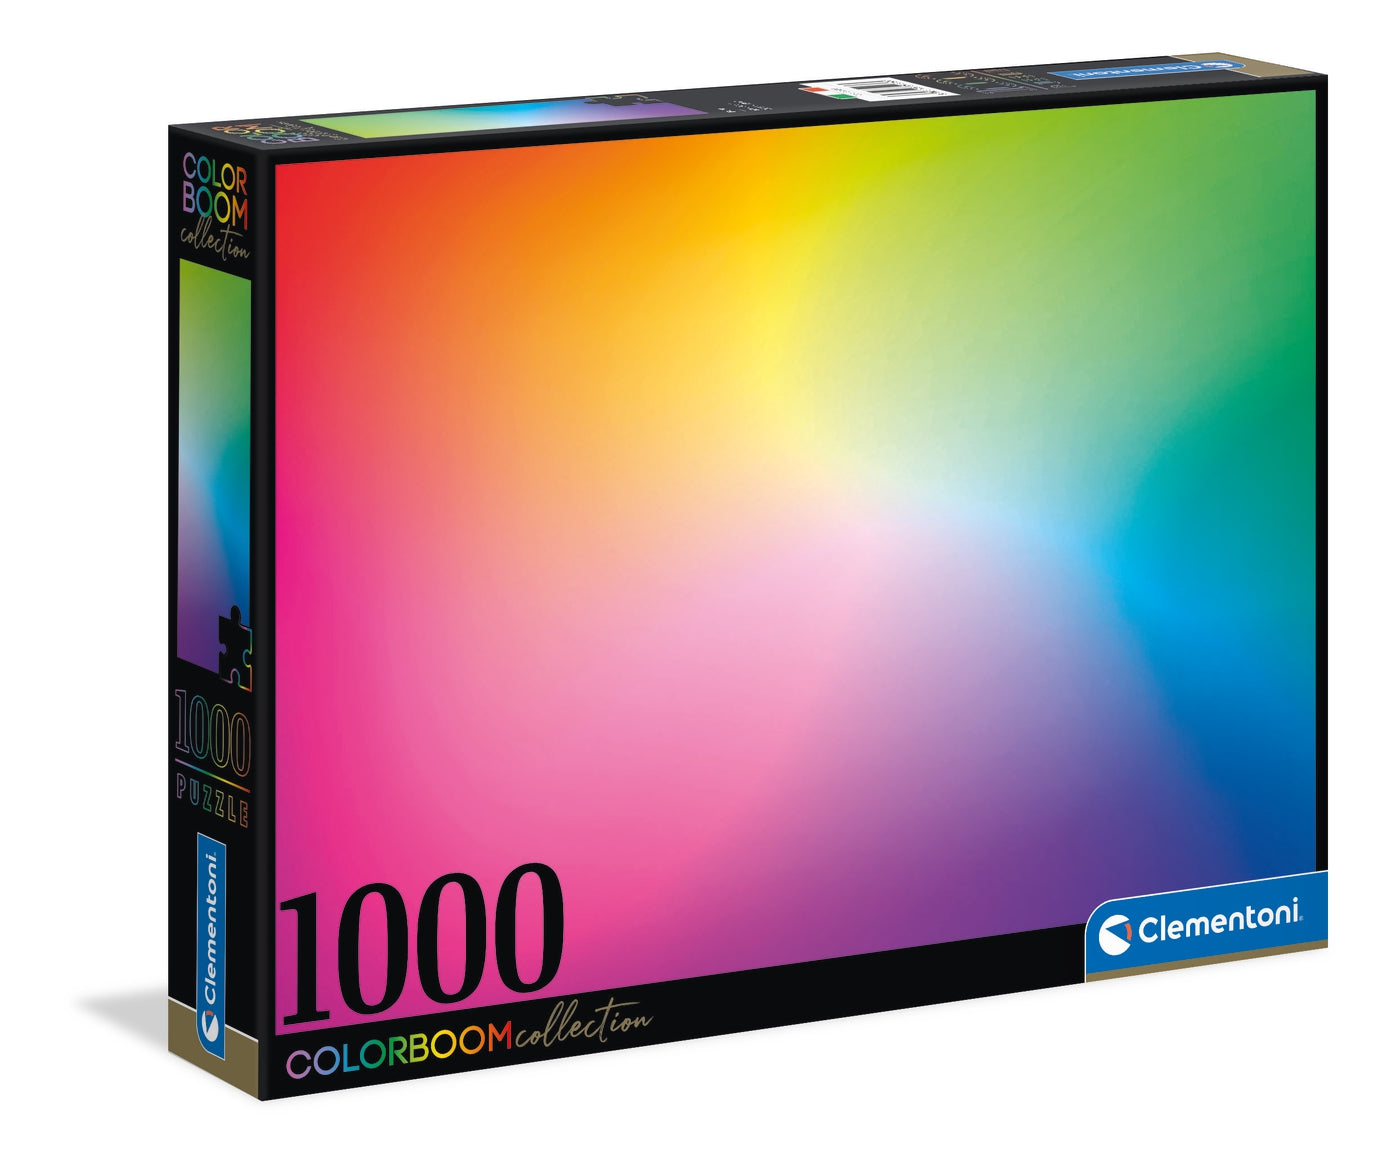 Colorboom Pure by Clementoni, 1000 Piece Puzzle